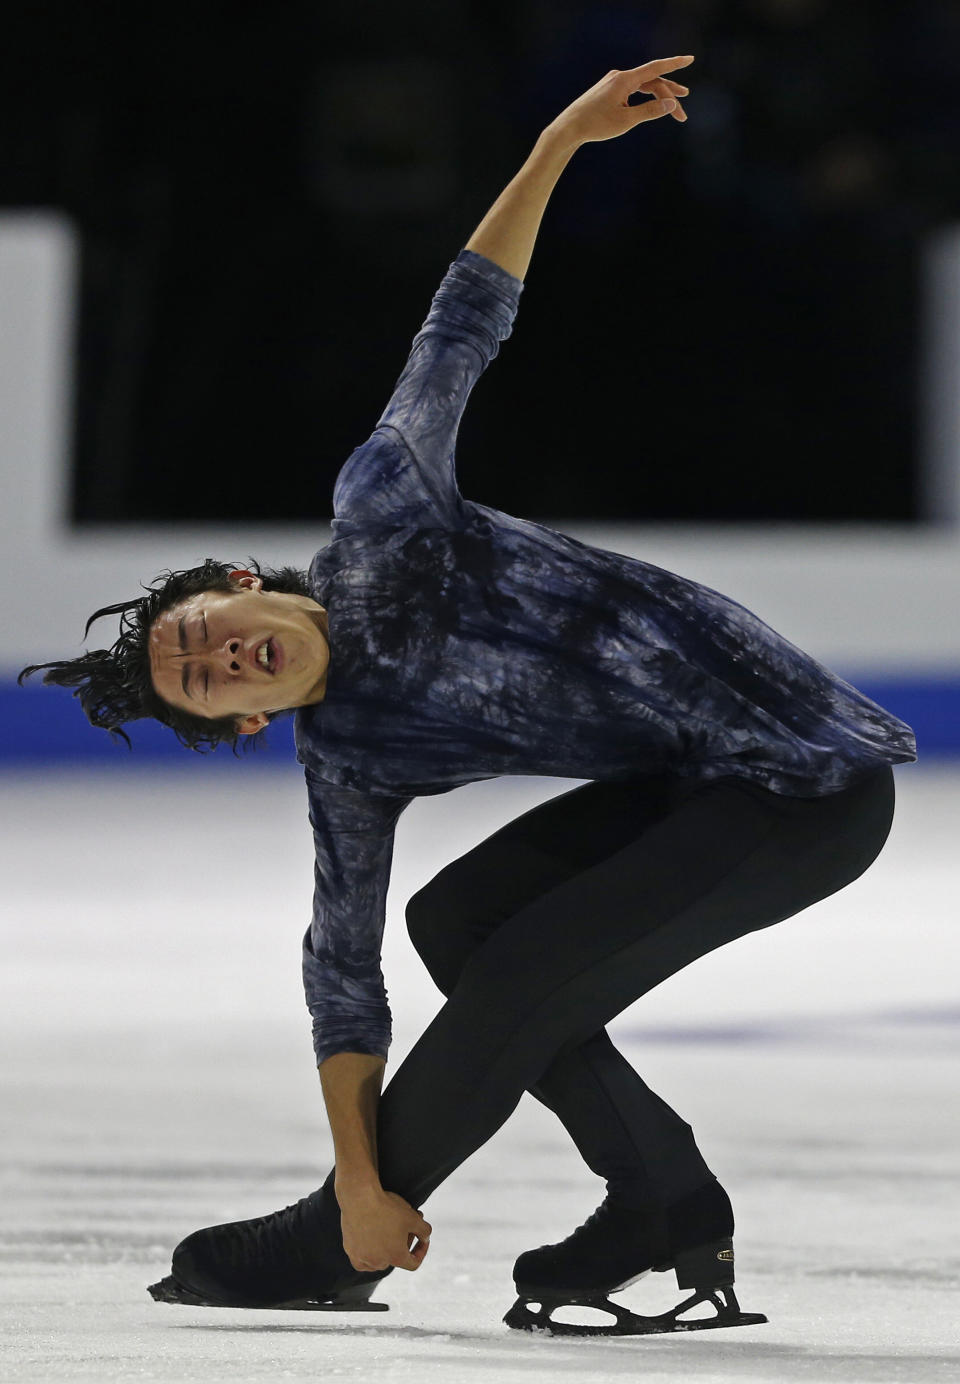 Nathan Chen performs during the men's free skating program at Skate America, Saturday, Oct. 20, 2018, in Everett, Wash. (Olivia Vanni/The Herald via AP)